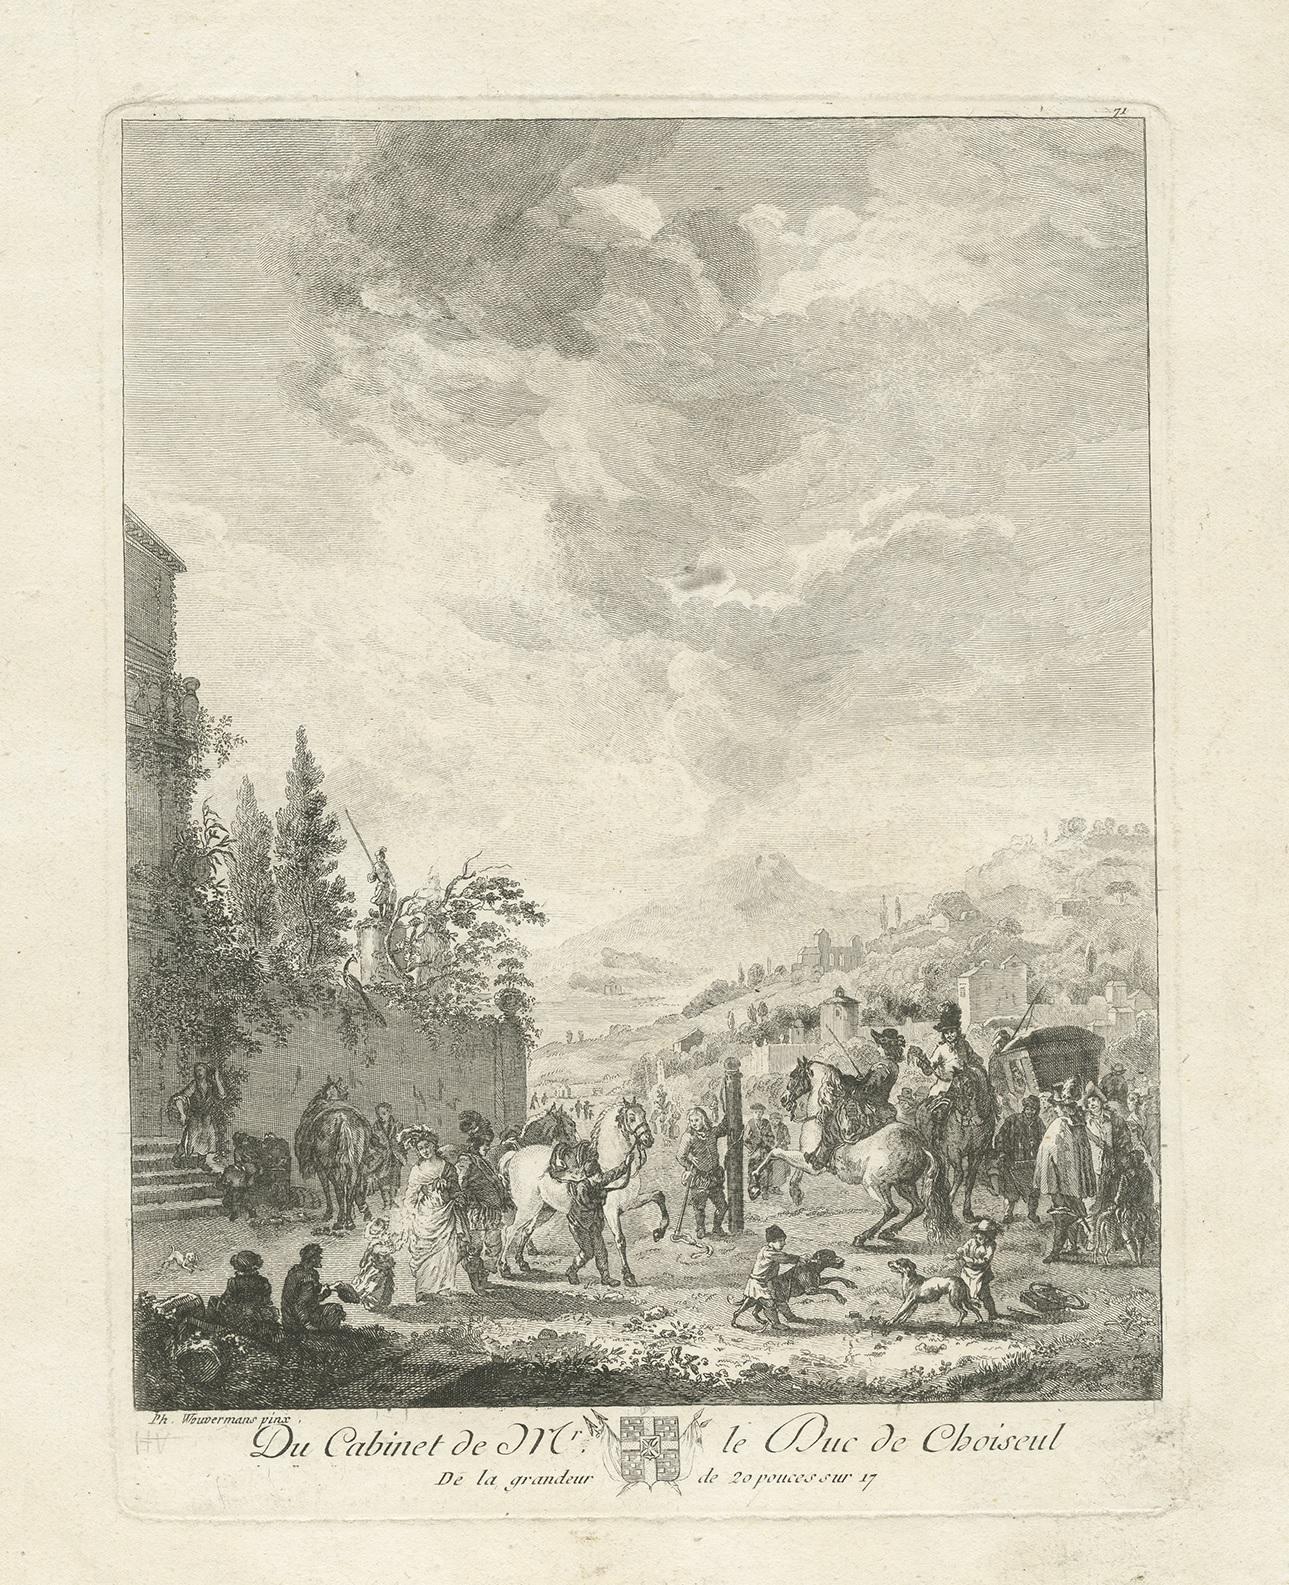 Antique print titled 'Du Cabinet de Mr. Le Duc de Choiseul'. Engraving after the original painting by Philips Wouwerman. Scene of horse fair. Source unknown, to be determined.